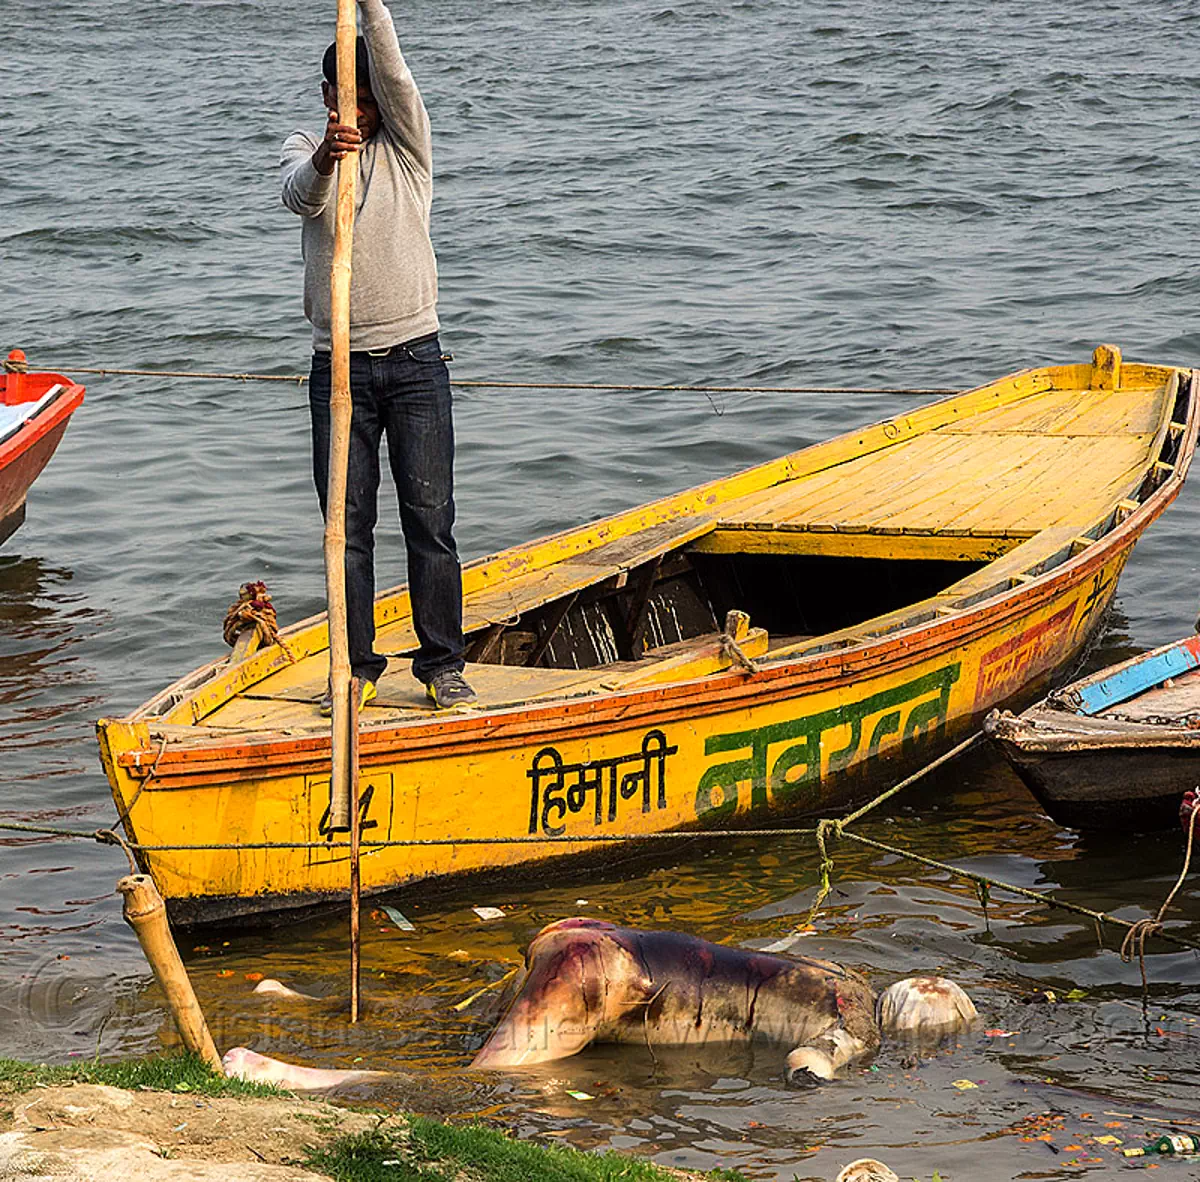 boatman moving decomposed cadaver floating on the ganges river (india), bloated, blood, cadaver, corpse, dead, death, decomposed body, decomposing, floating, ganga, ganges river, hindu, hinduism, human remains, man, paddle, putrefied, river boat, varanasi, yellow